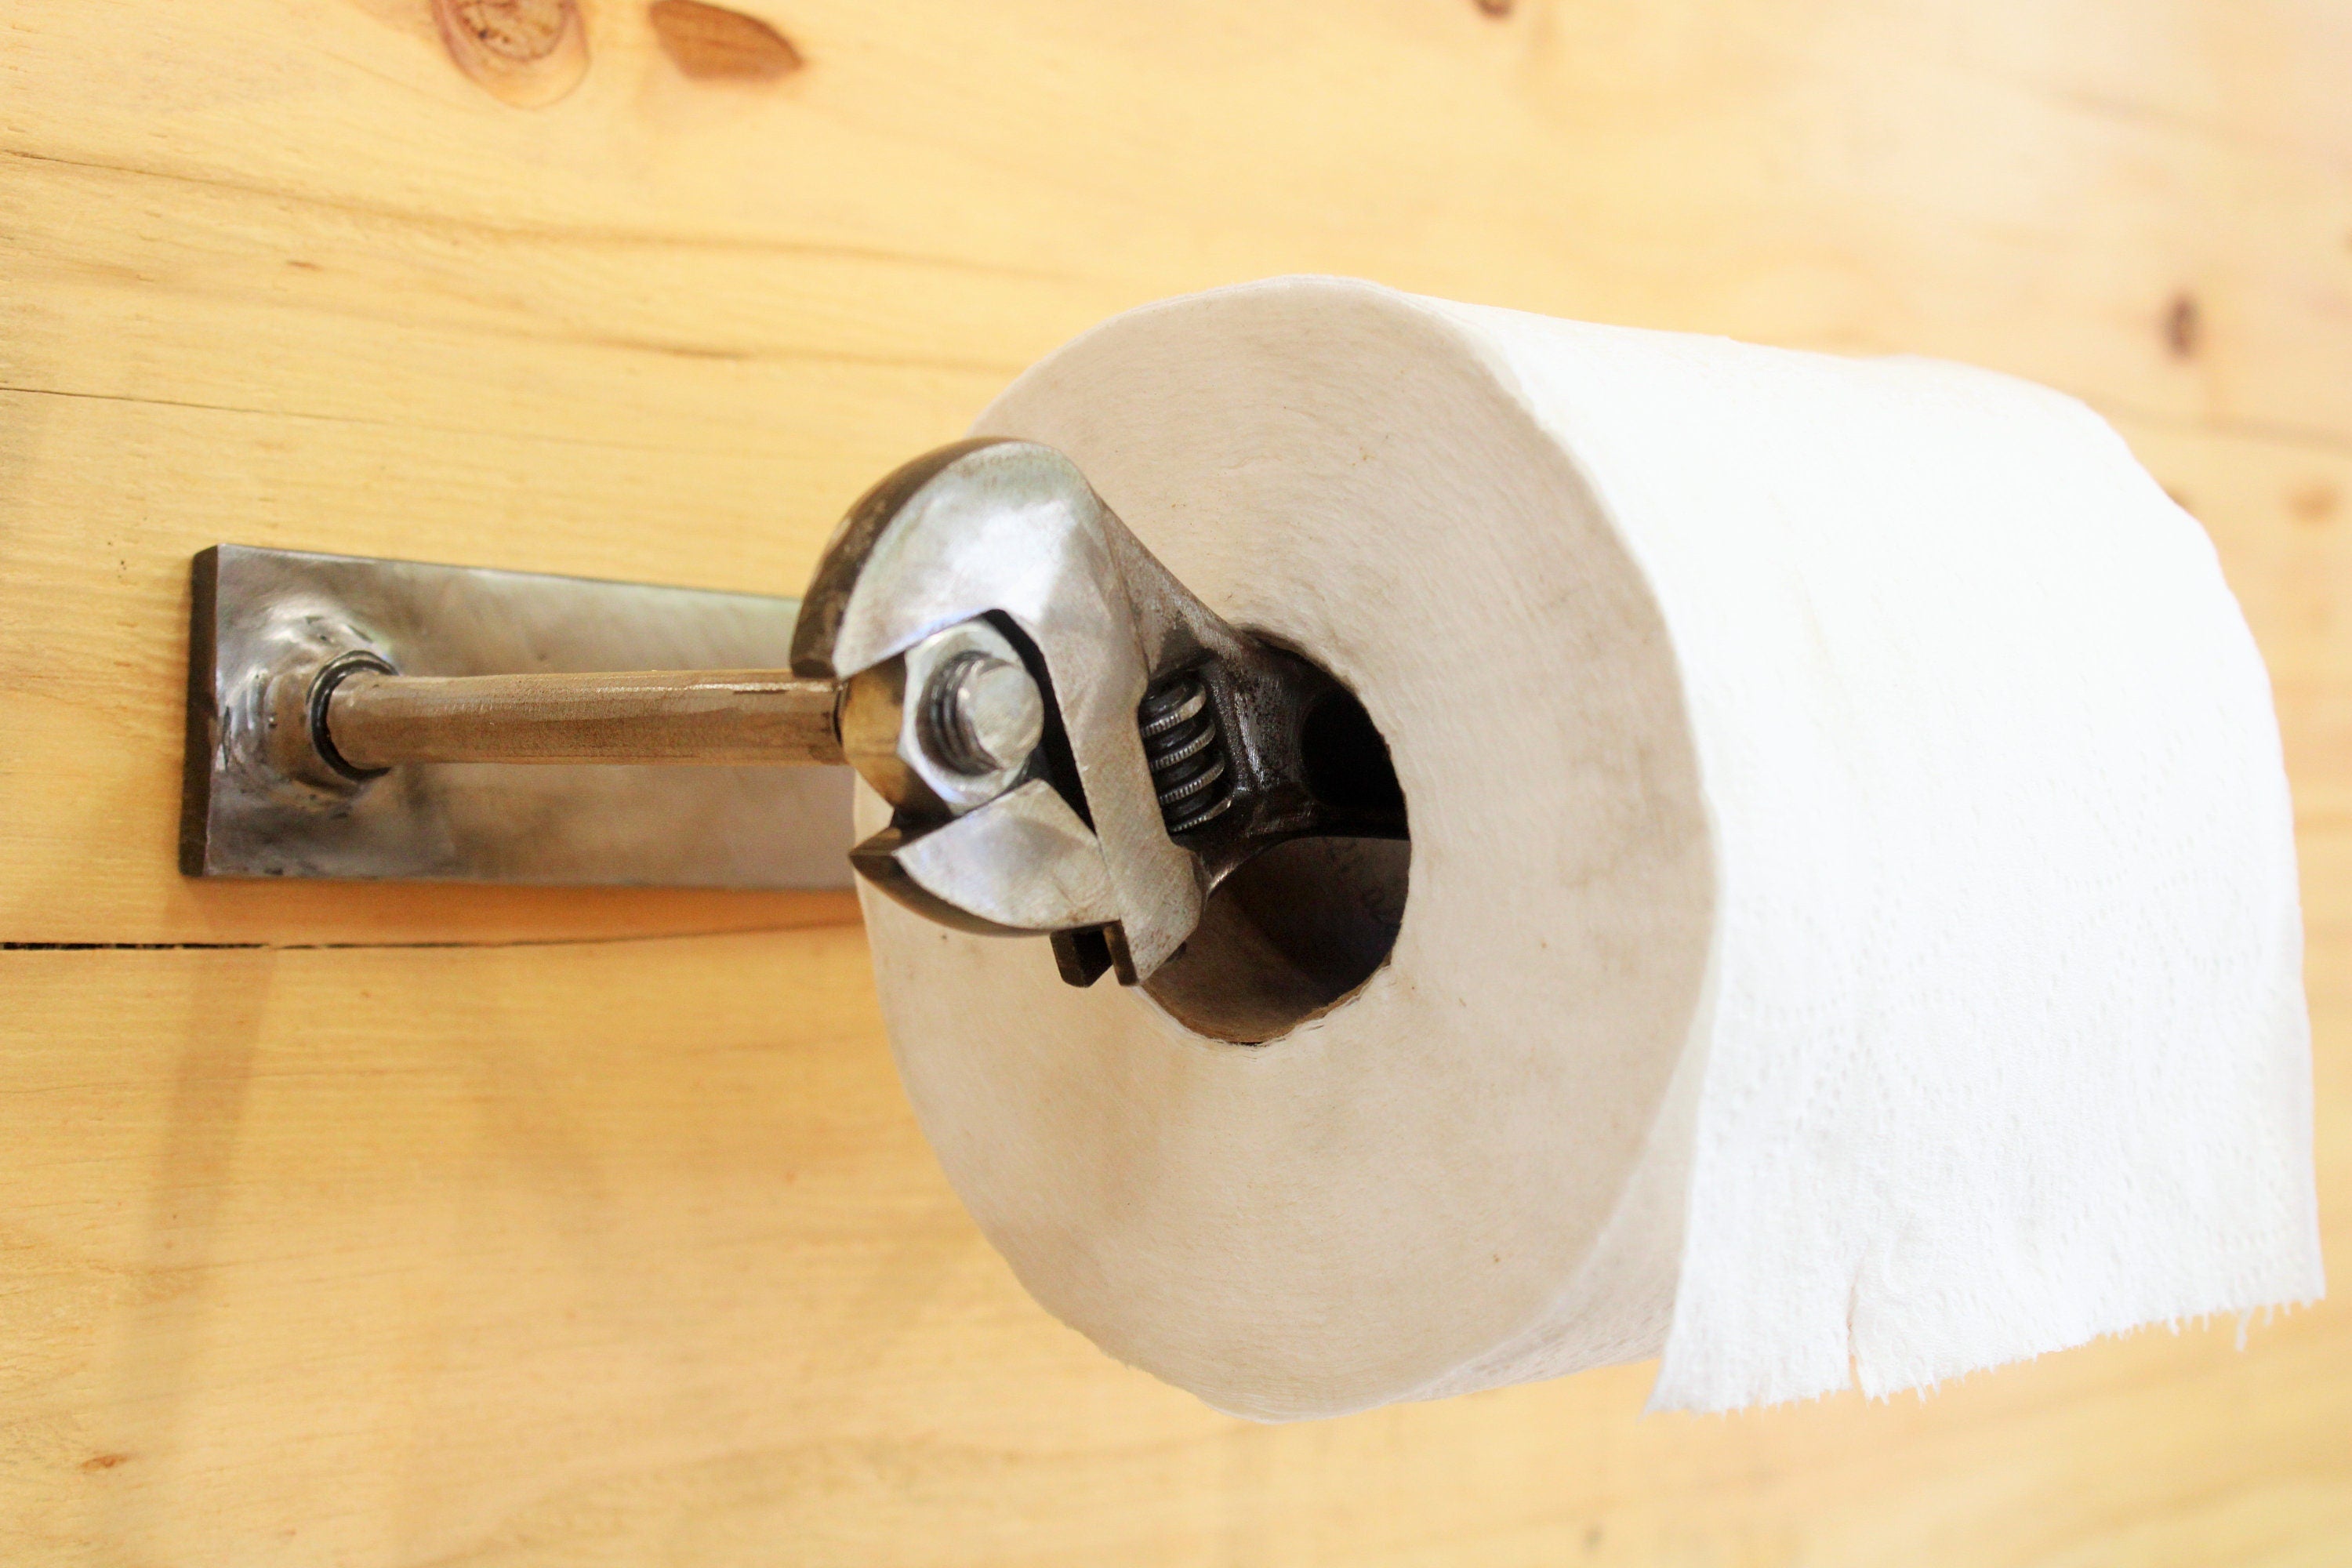 Toilet Paper Holder for Car Lover - Wrench and Nut Design Bathroom Decor!